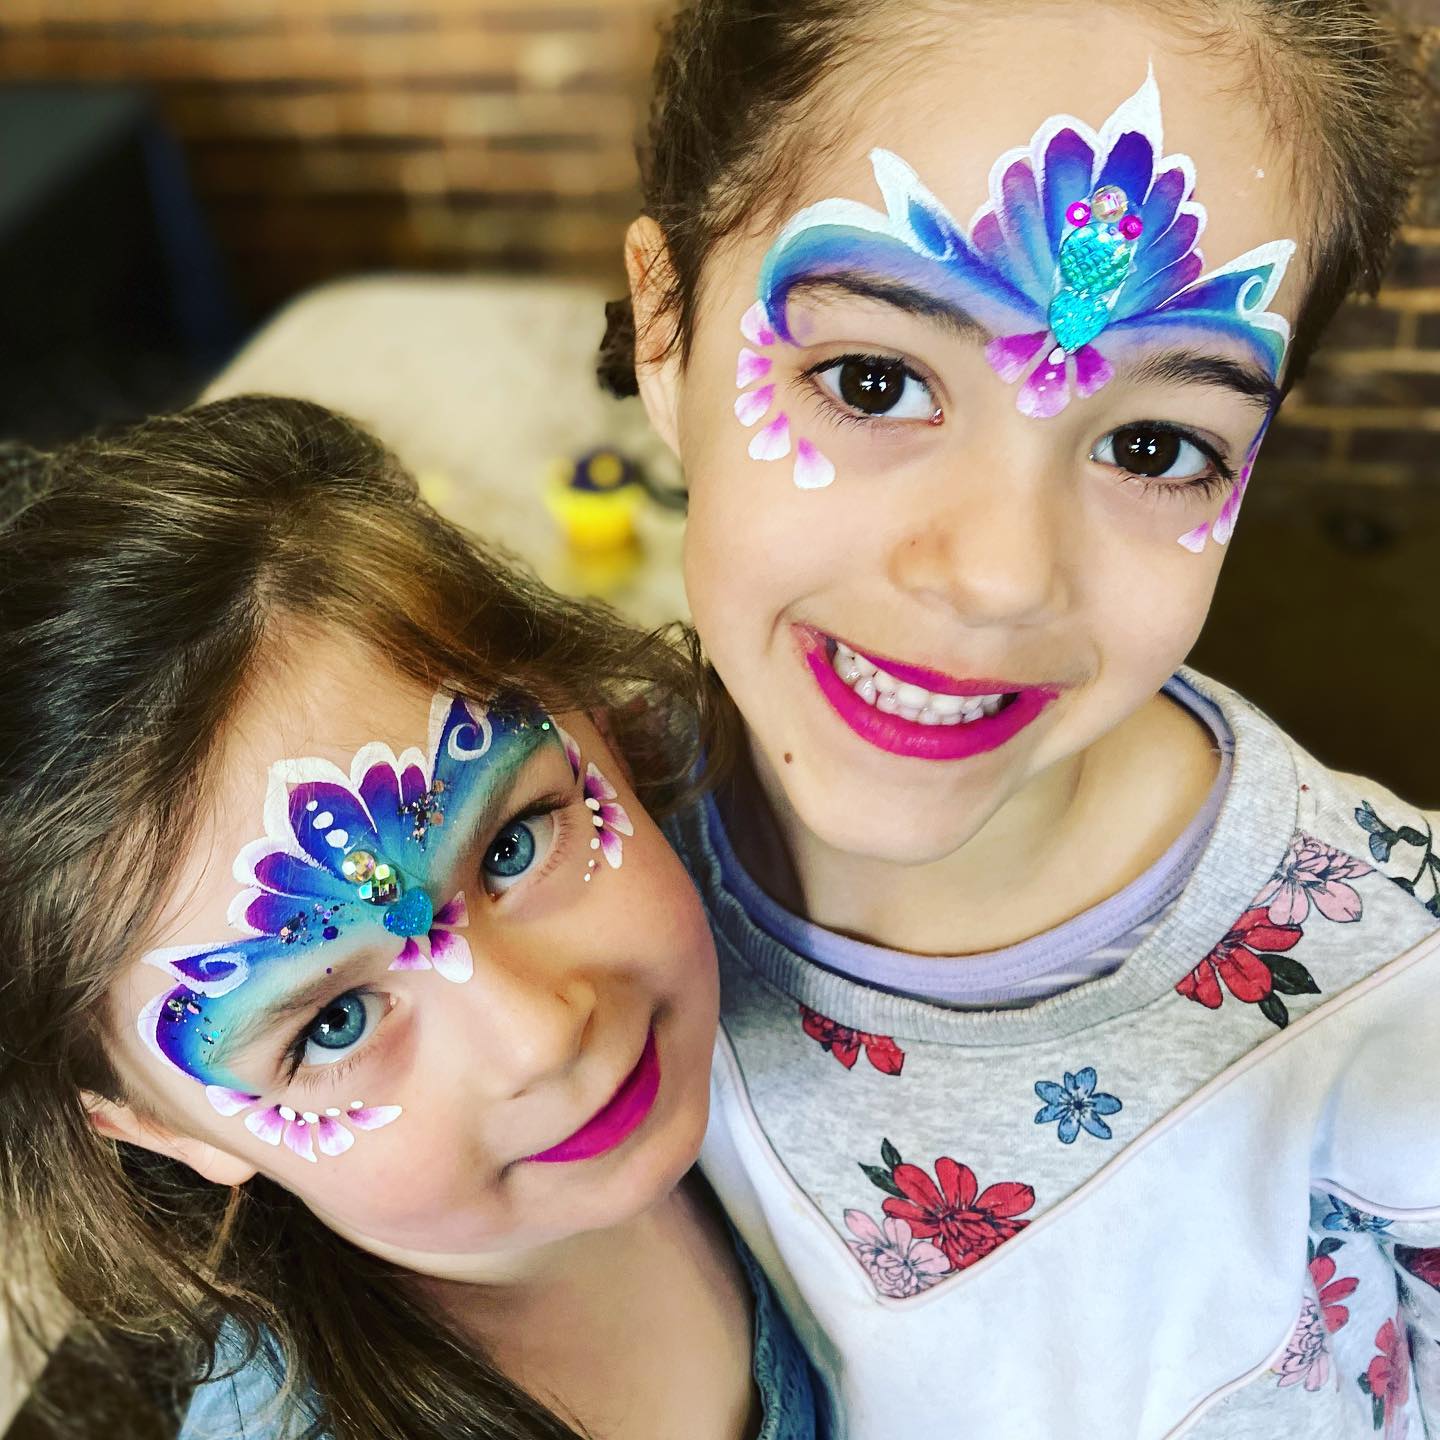 Beautiful princess cousins 👑👑 they were so happy to have the same face painting 💜

#tesselaartulipfestival
#tesselaarkabloom
#fairyfacepainting
#lineworkfacepainting
#fastfacepainting
#facepainter 
#facepainting 
#melbournefacepainter 
#melbournefacepainting 
#facepaintingmelbourne 
#looneybinproducts
#melbournekidsparties 
#facepaintersofinstagram 
#onestrokefacepainting#melbourneballoontwister
#melbournekids
#melbournemumsandbubs
#fairypartymelbourne